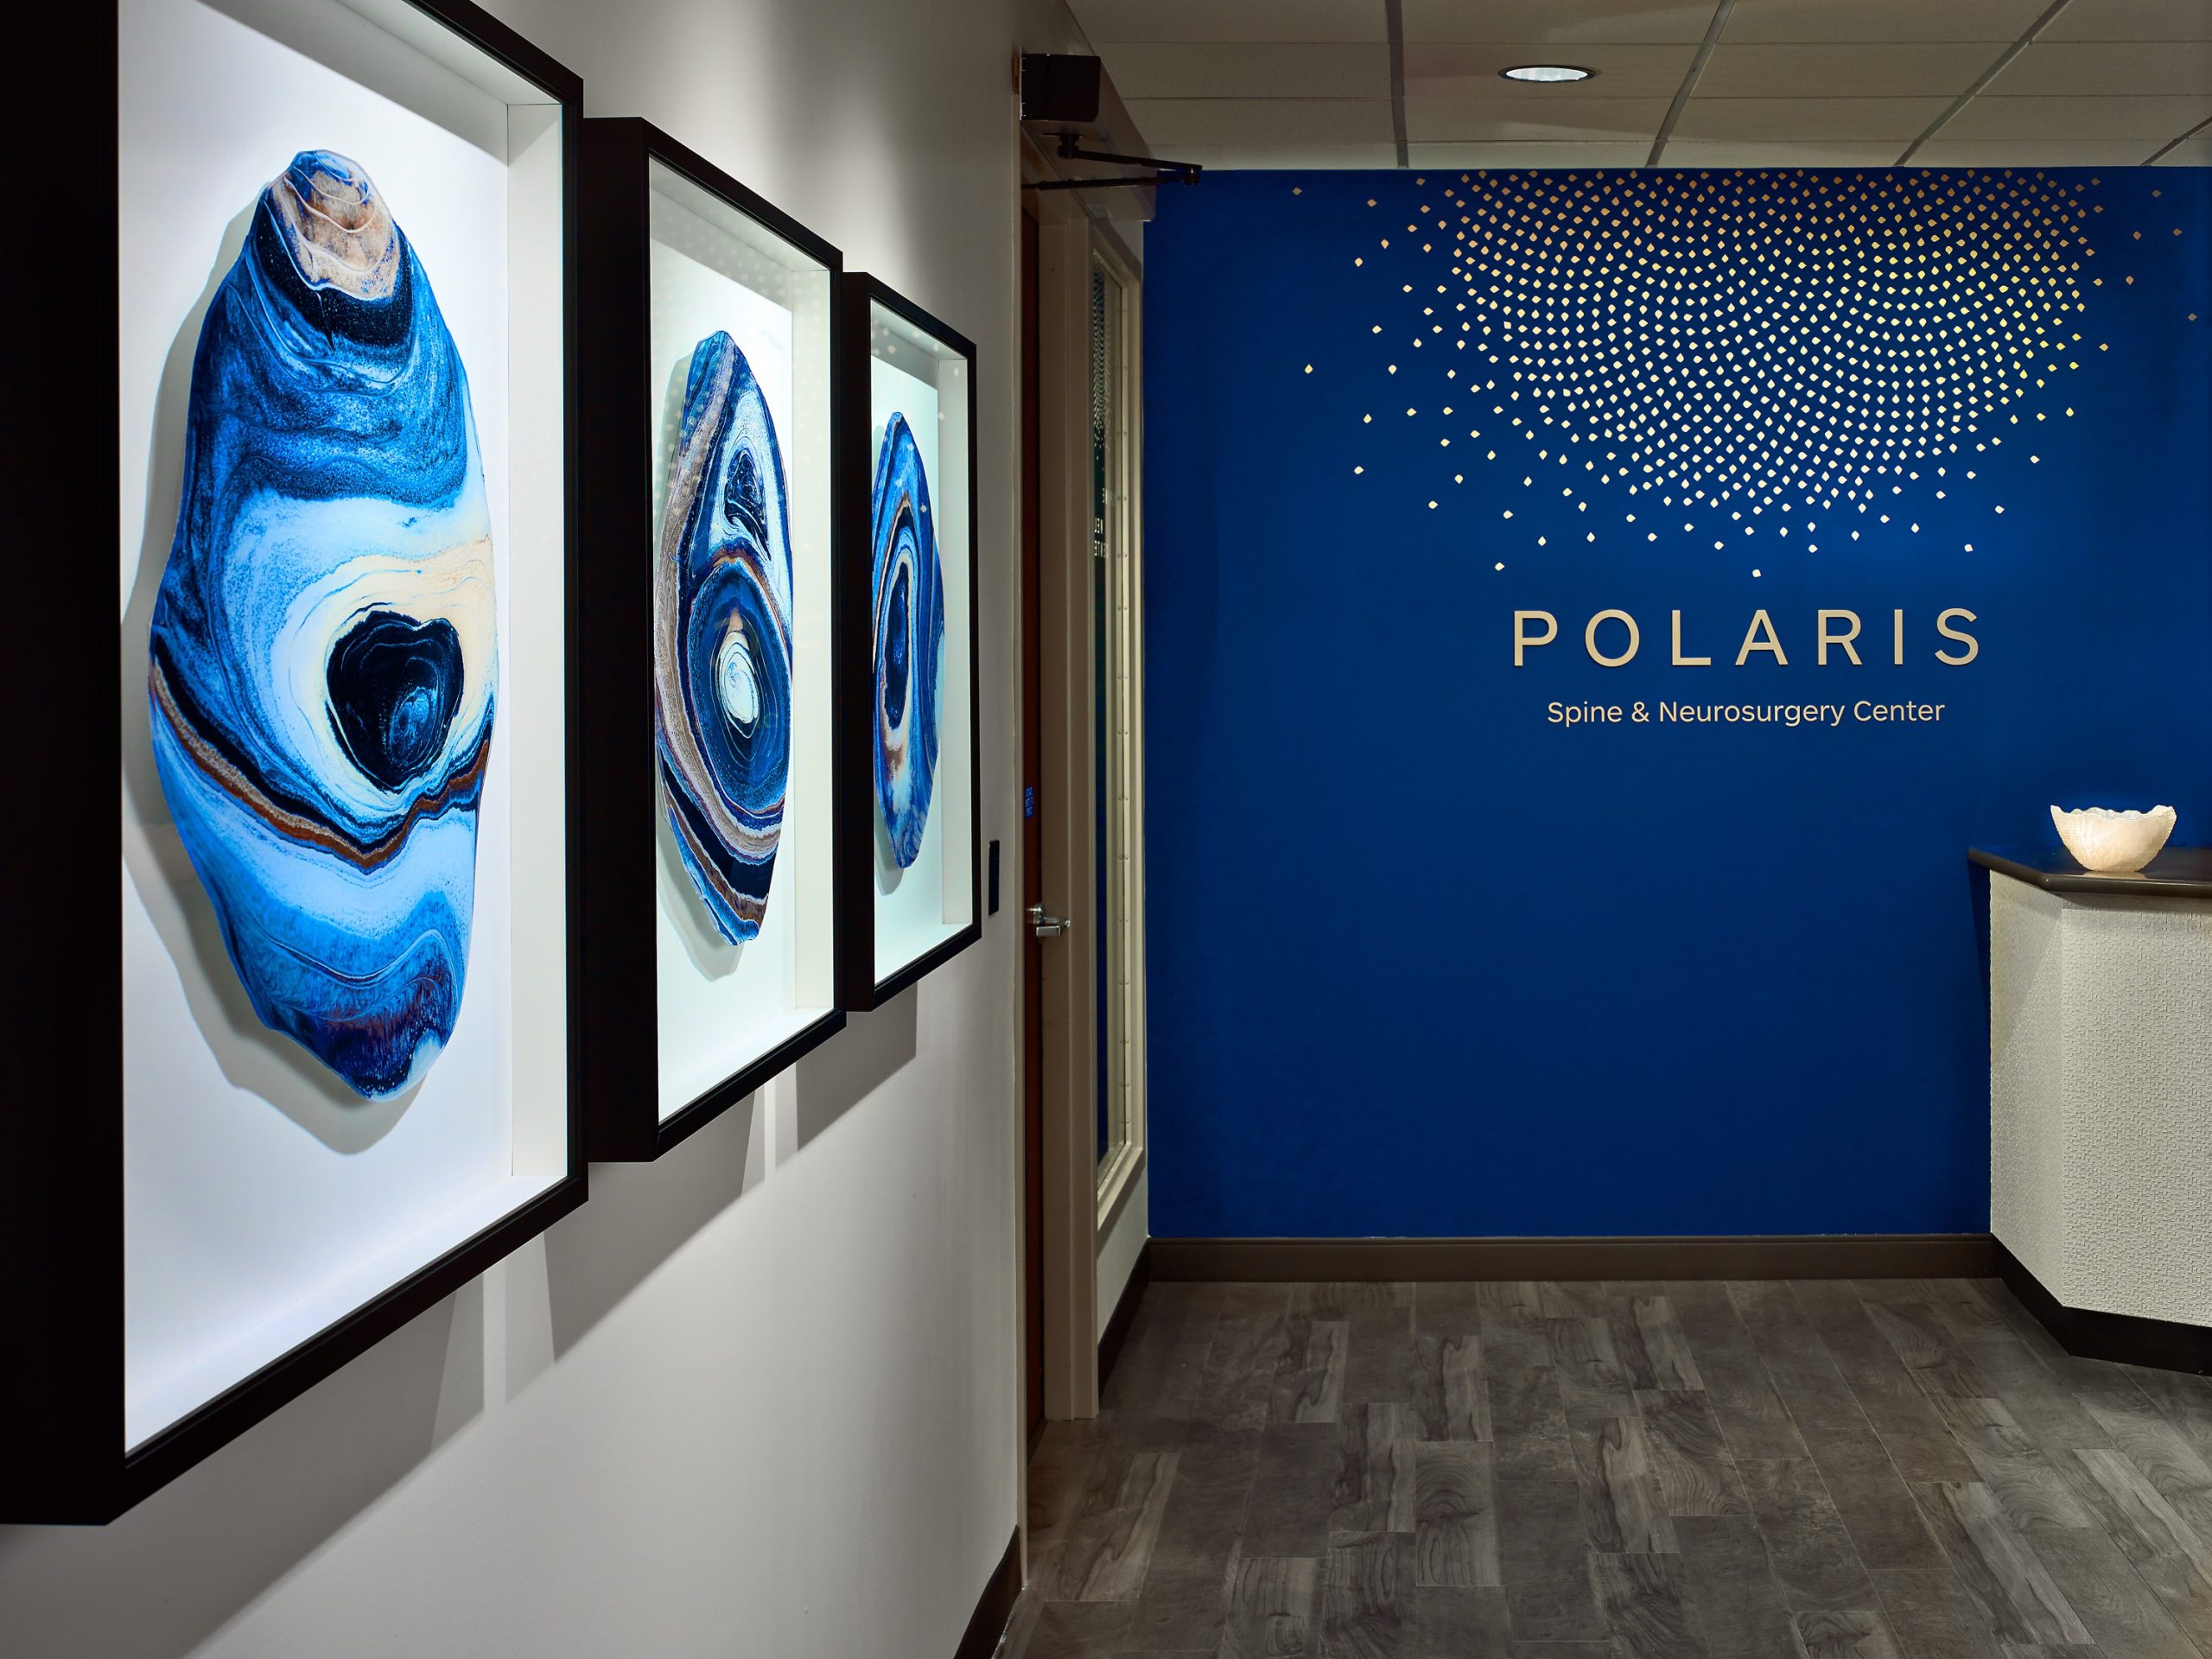 hallway leading to Polaris Spine and Neurosurgery center with blue agate wall art